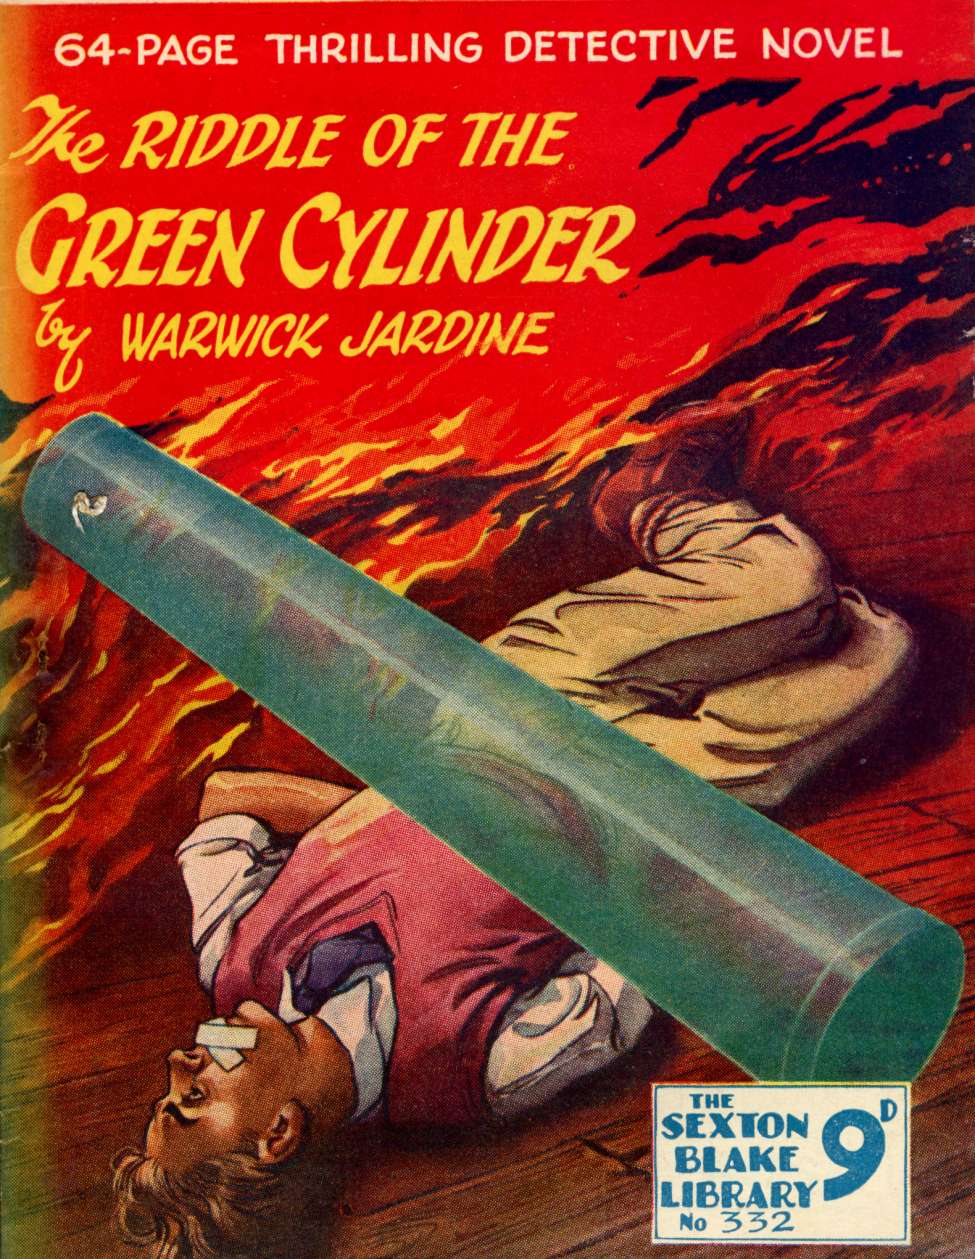 Comic Book Cover For Sexton Blake Library S3 332 - The Riddle of the Green Cylinder